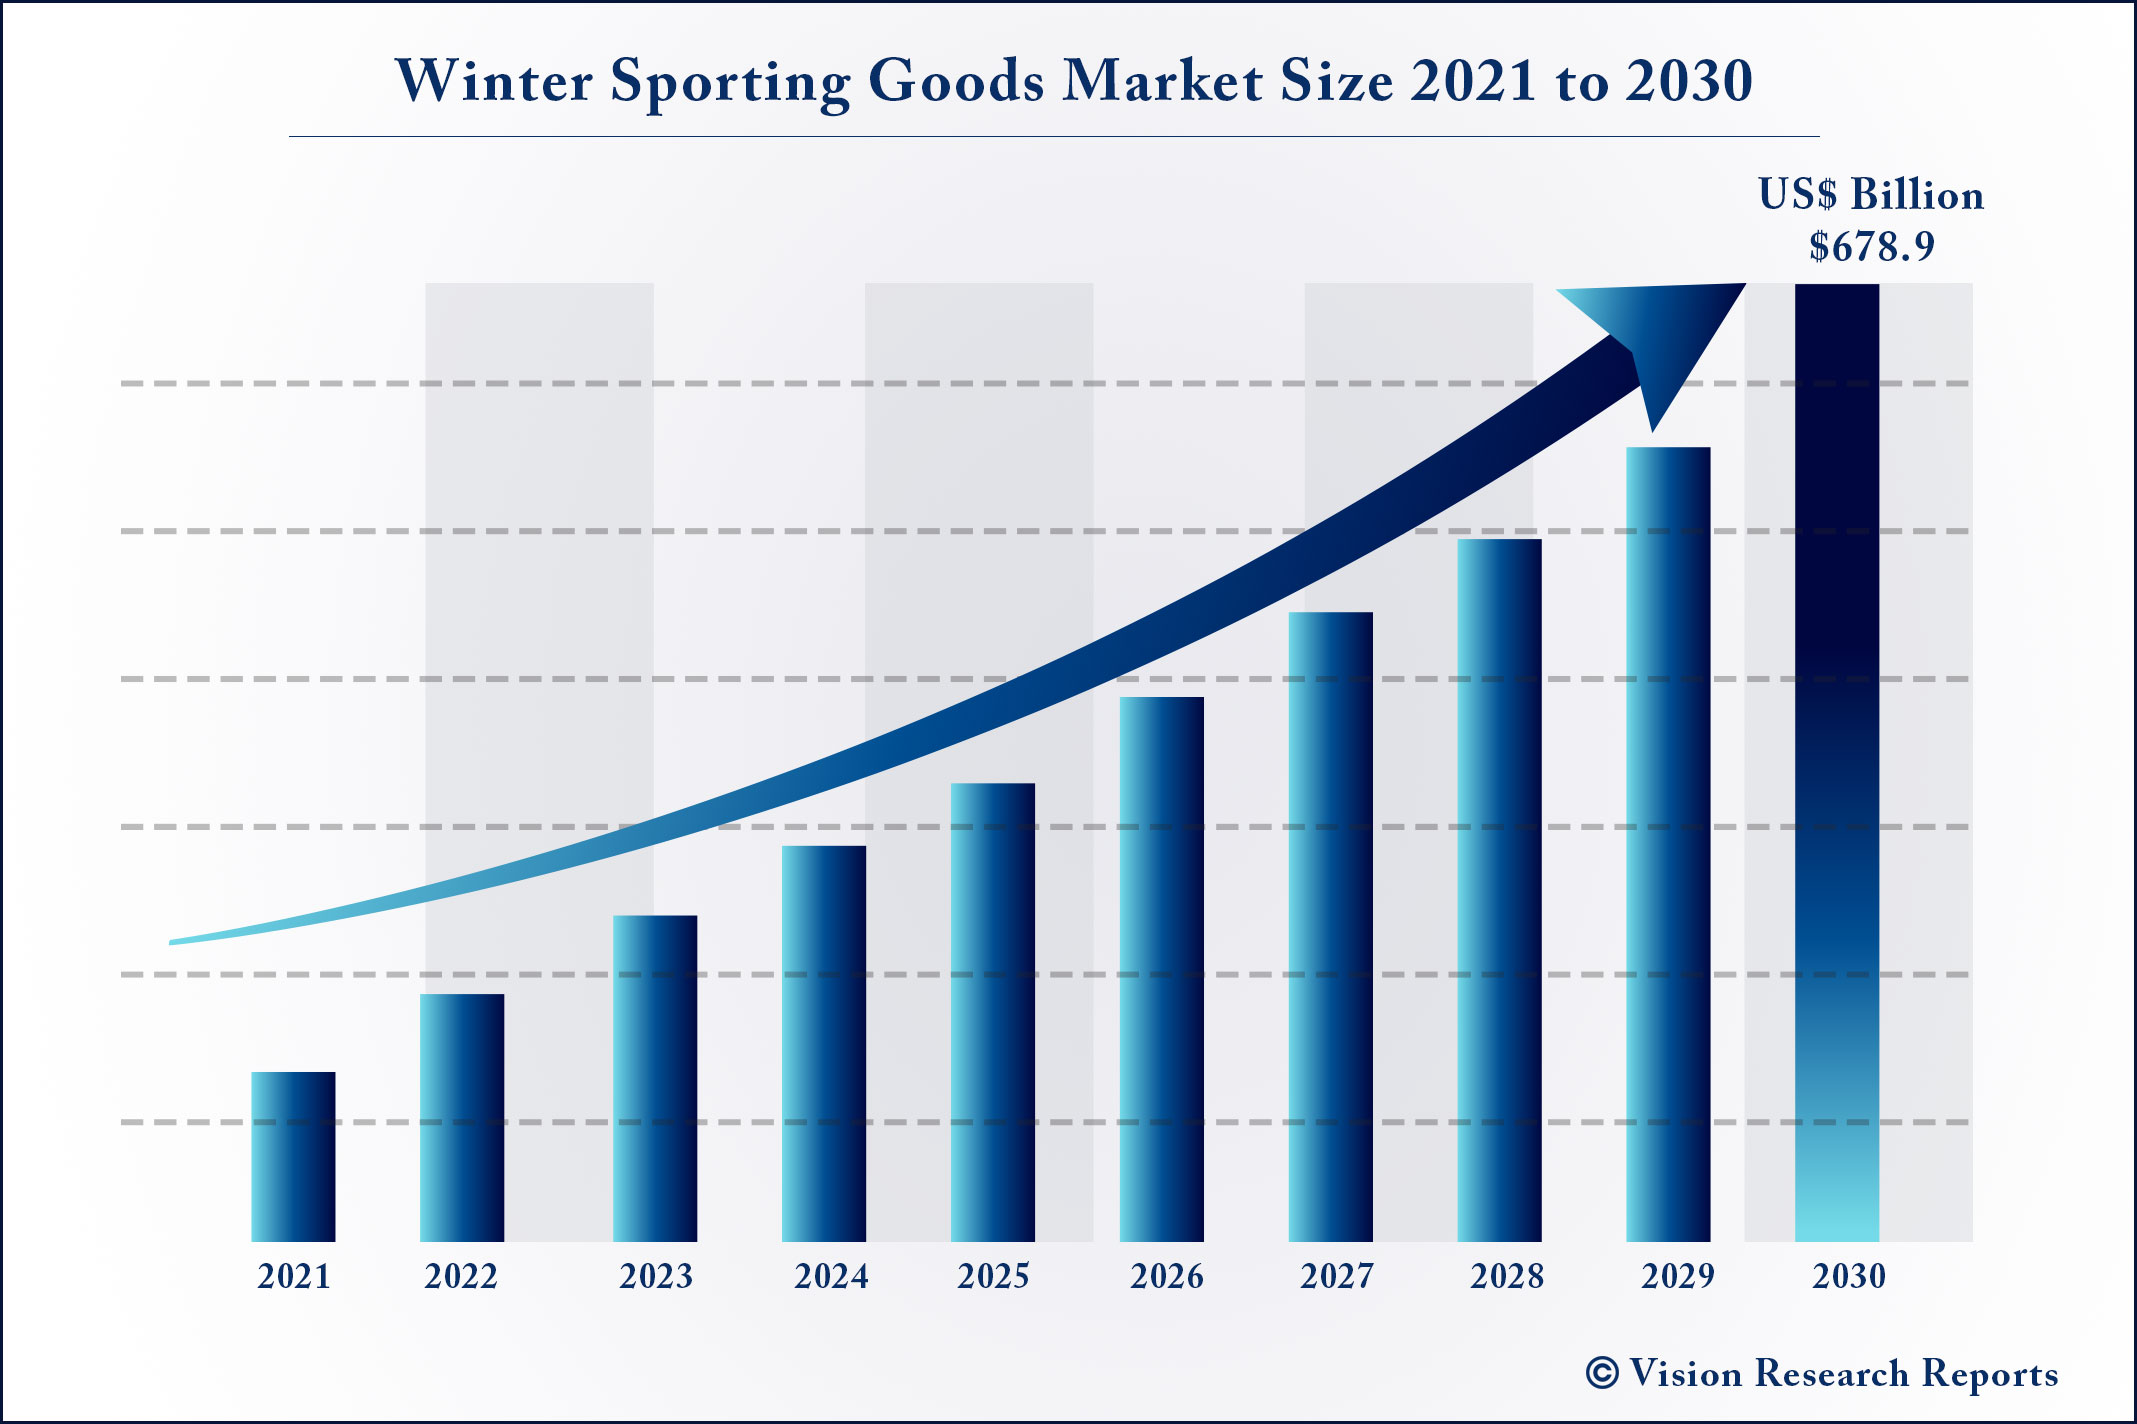 Winter Sporting Goods Market Size 2021 to 2030